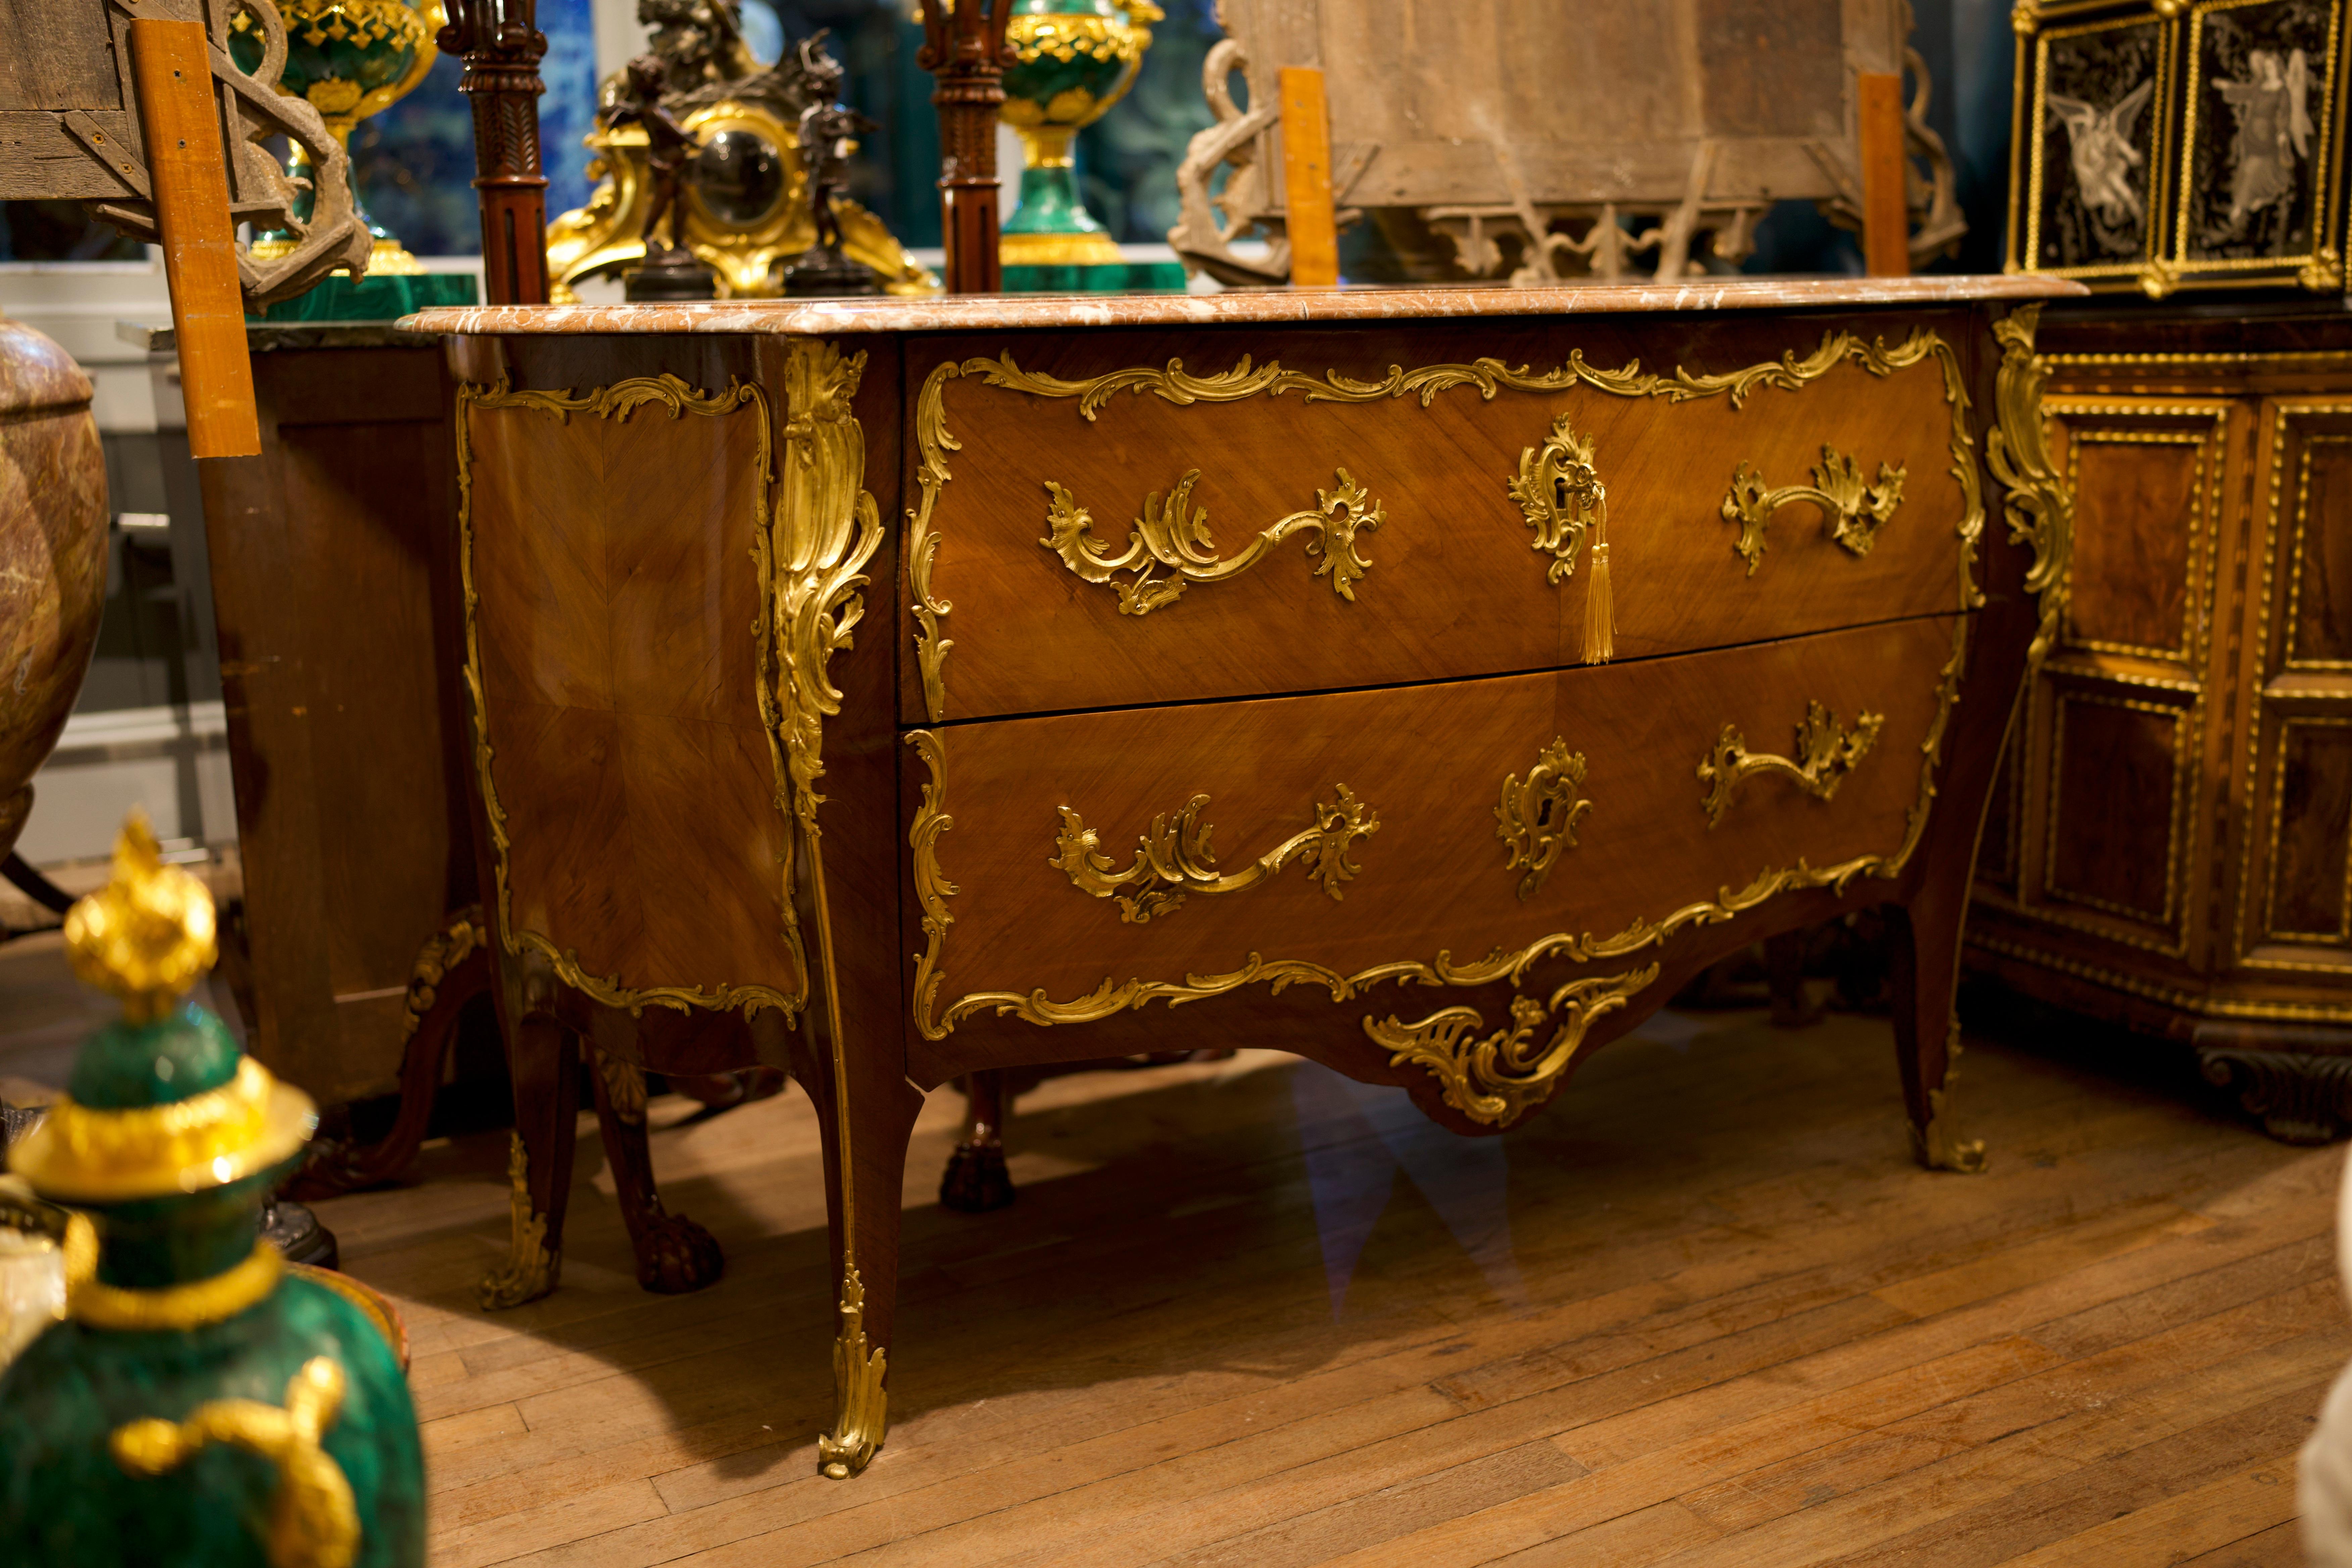 18th century marble-top bronze mounted Kingwood Louis XV Commode.

Spectacular custom quality commode with full bronze shoes leading to a myriad of bronze trim work and floral inlays of kings-wood and satinwood design. The marble top supported by